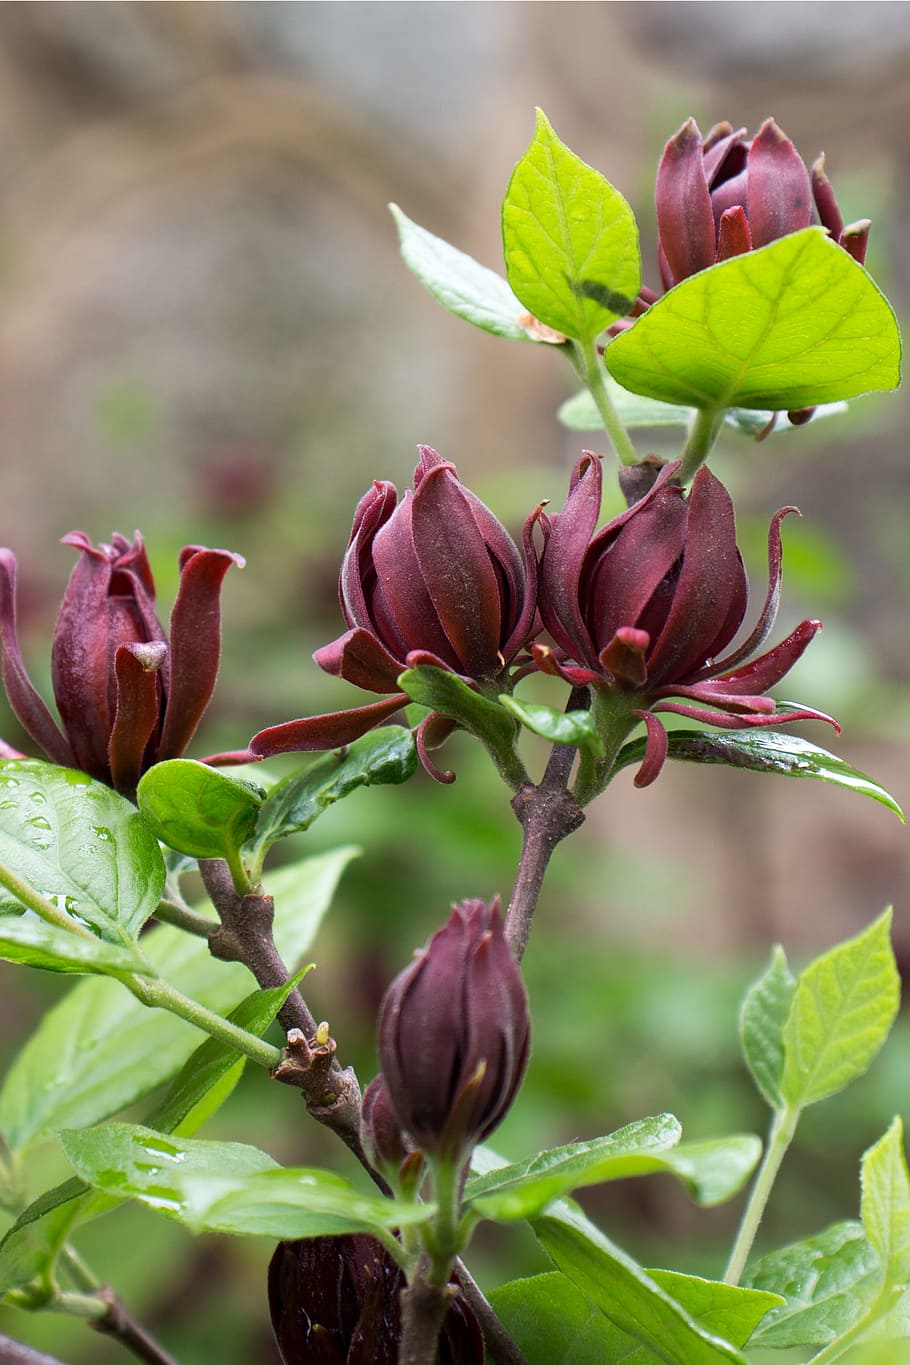 Calycanthus floridus, commonly called Carolina allspice, is an uncommon rounded deciduous shrub that grows to 6-9 tall. It features fragrant, brown to burgundy flowers which come into bloom from mid-April to mid-May. Flowers give way to brownish, urn-shaped fruits seed pods which mature in the fall and last throughout the winter months. The dark, lustrous, green leaves and bark release a clove or camphor-like scent when crushed. Both the flowers and leaves are often used to make potpourris. Other names used are sweetshrub, strawberry bush, and hairy allspice. The shrub is native to the US from Virginia to Florida.